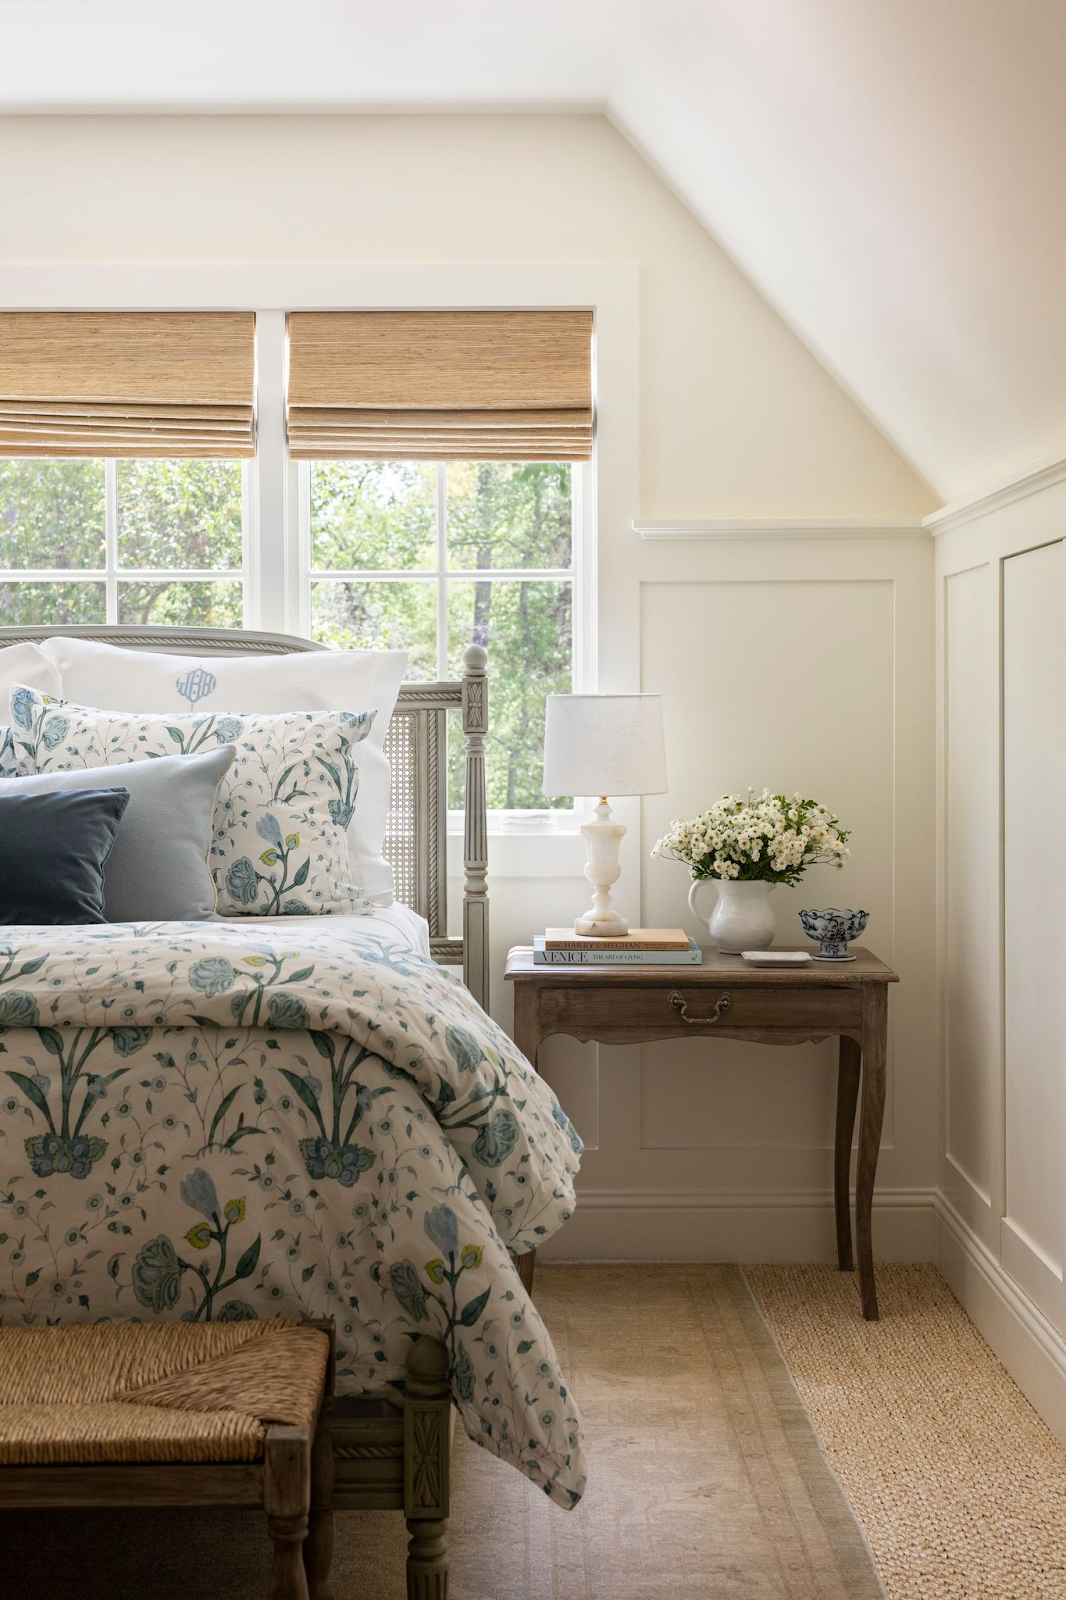 Guest bedroom at Hedwig village draws inspiration from the outdoors